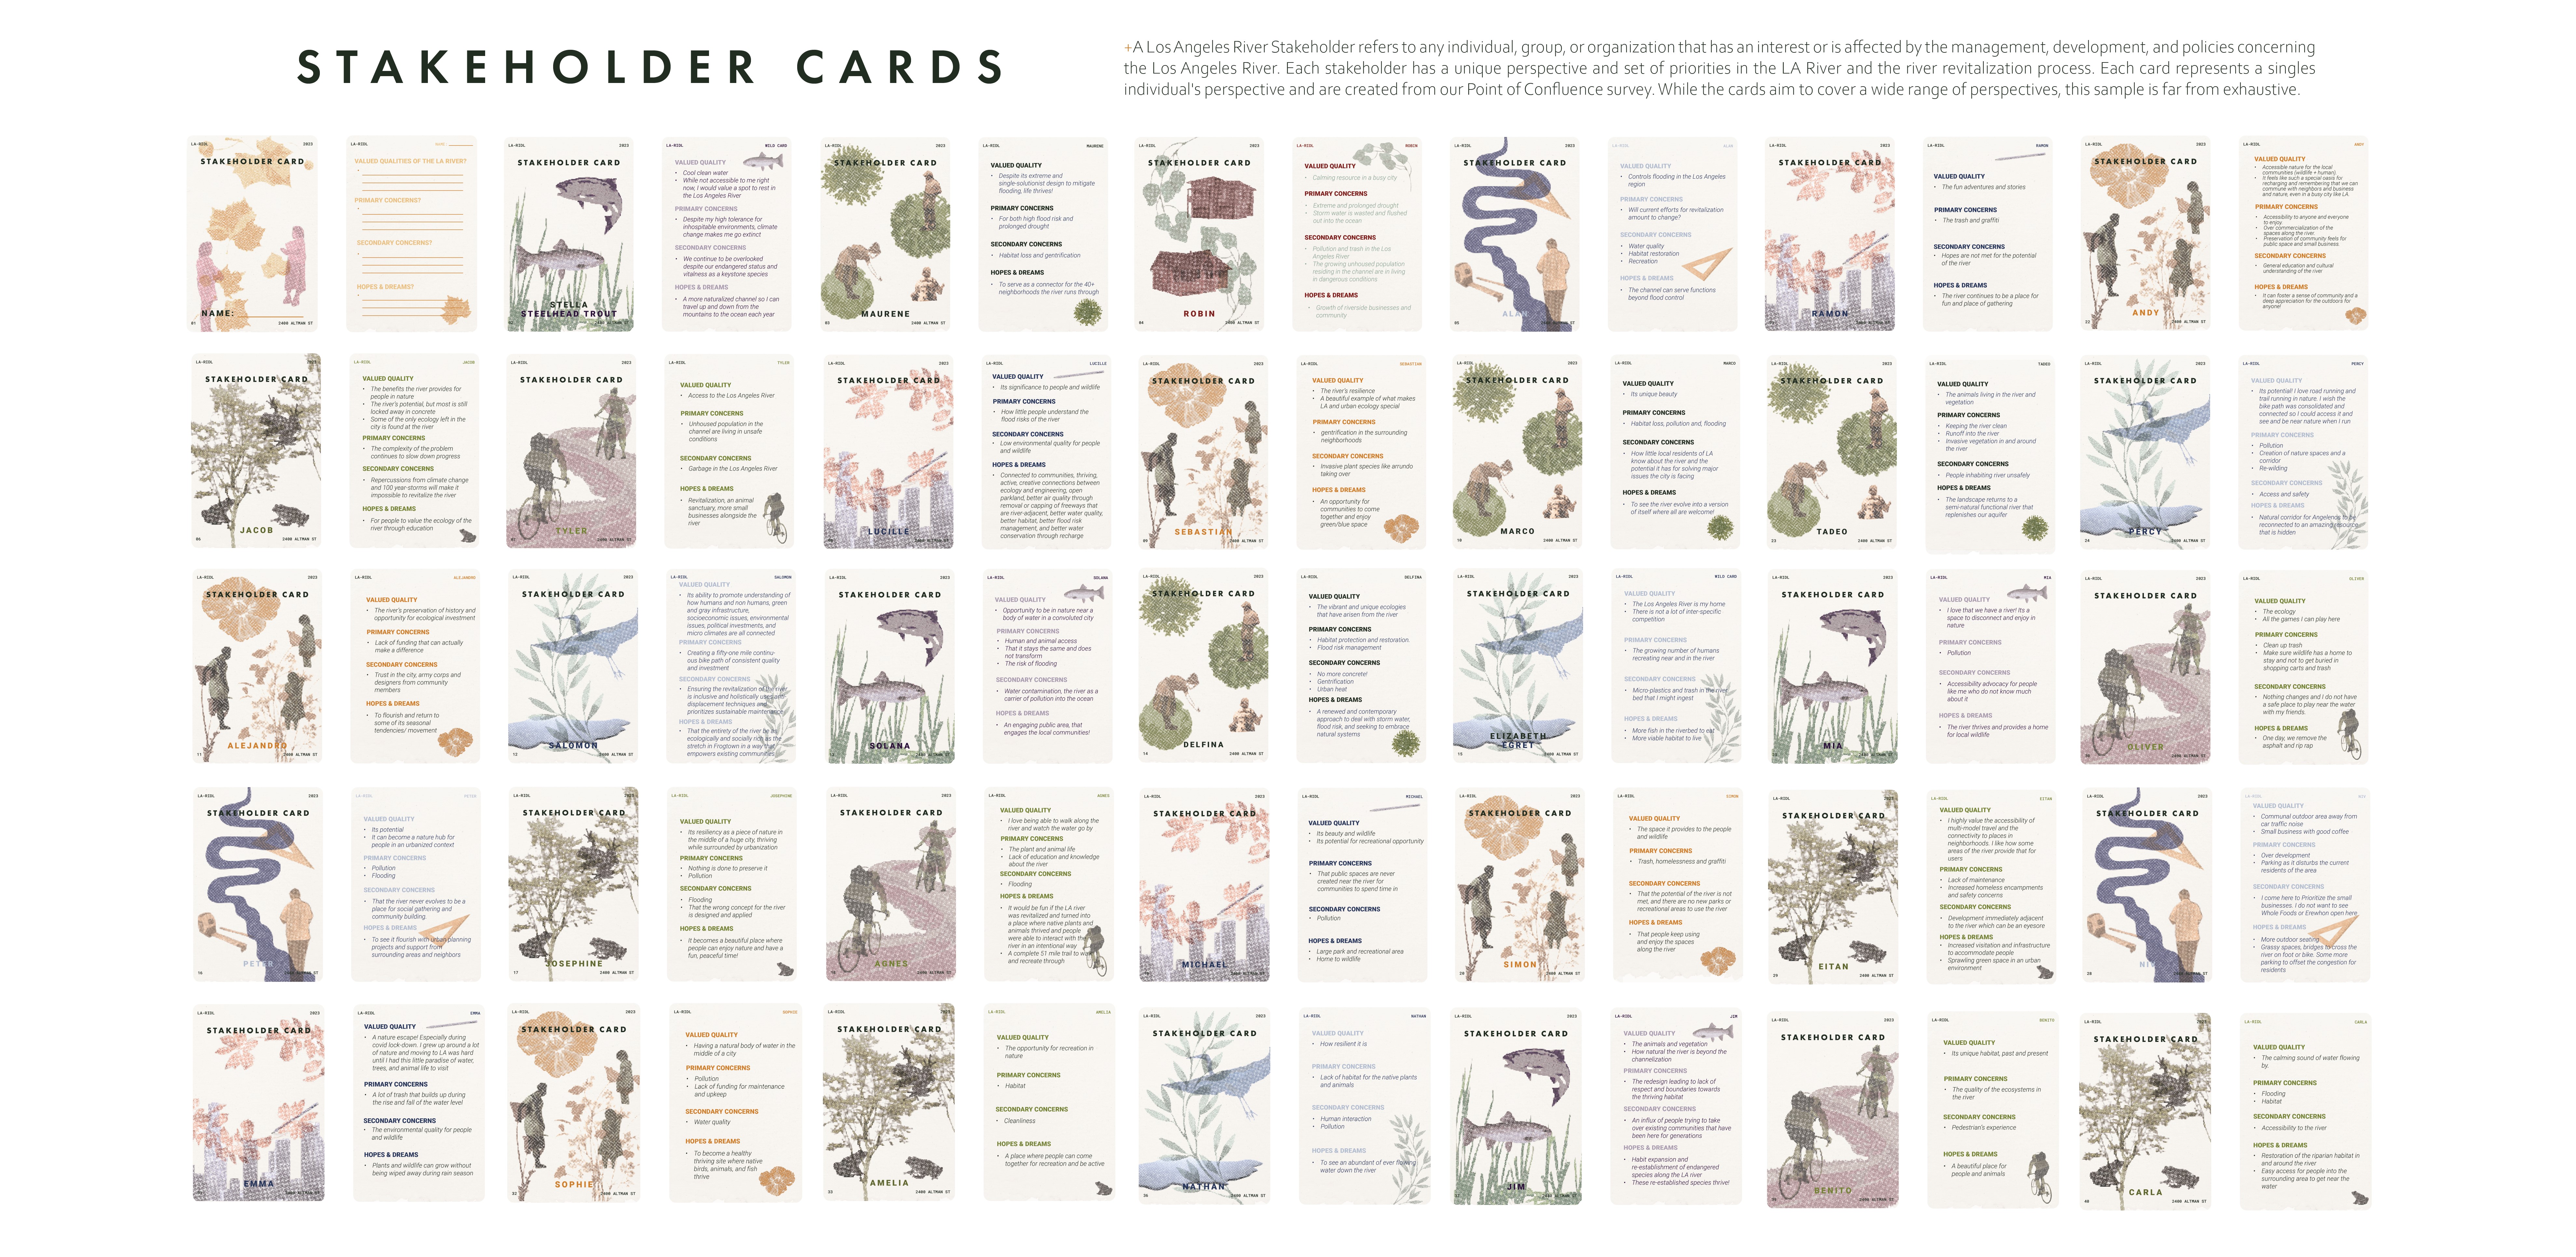 Sample Cards from the Point of Confluence Los Angeles River Stakeholder Deck